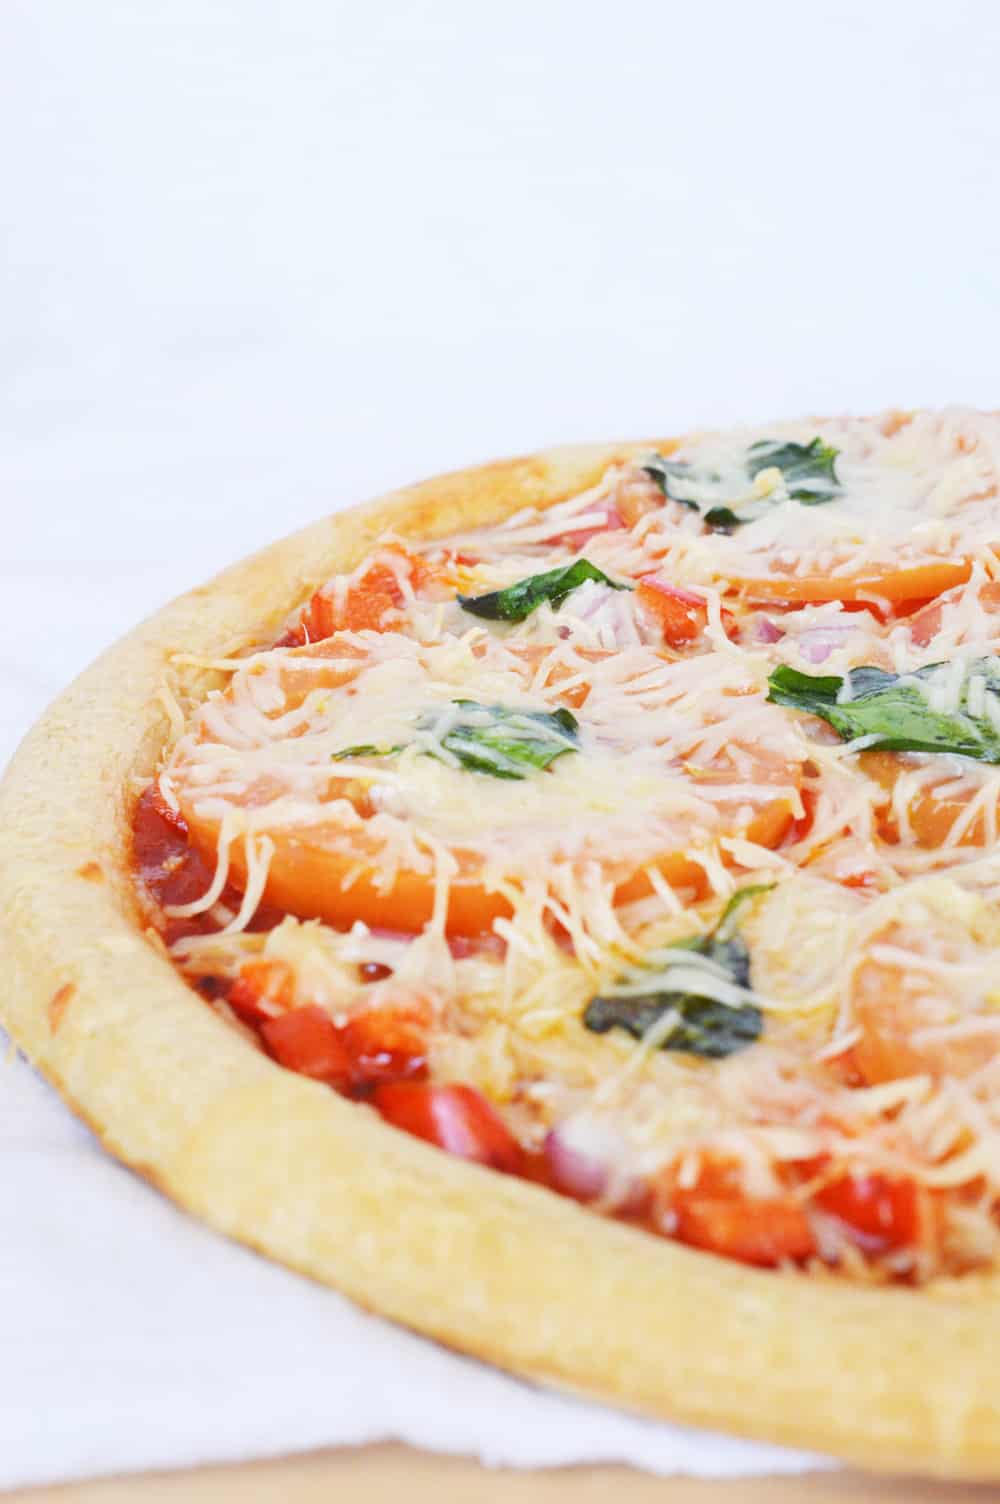 healthy pizza loaded with veggies, made with a whole grain crust, and topped with gooey mozzarella and fresh parmesan